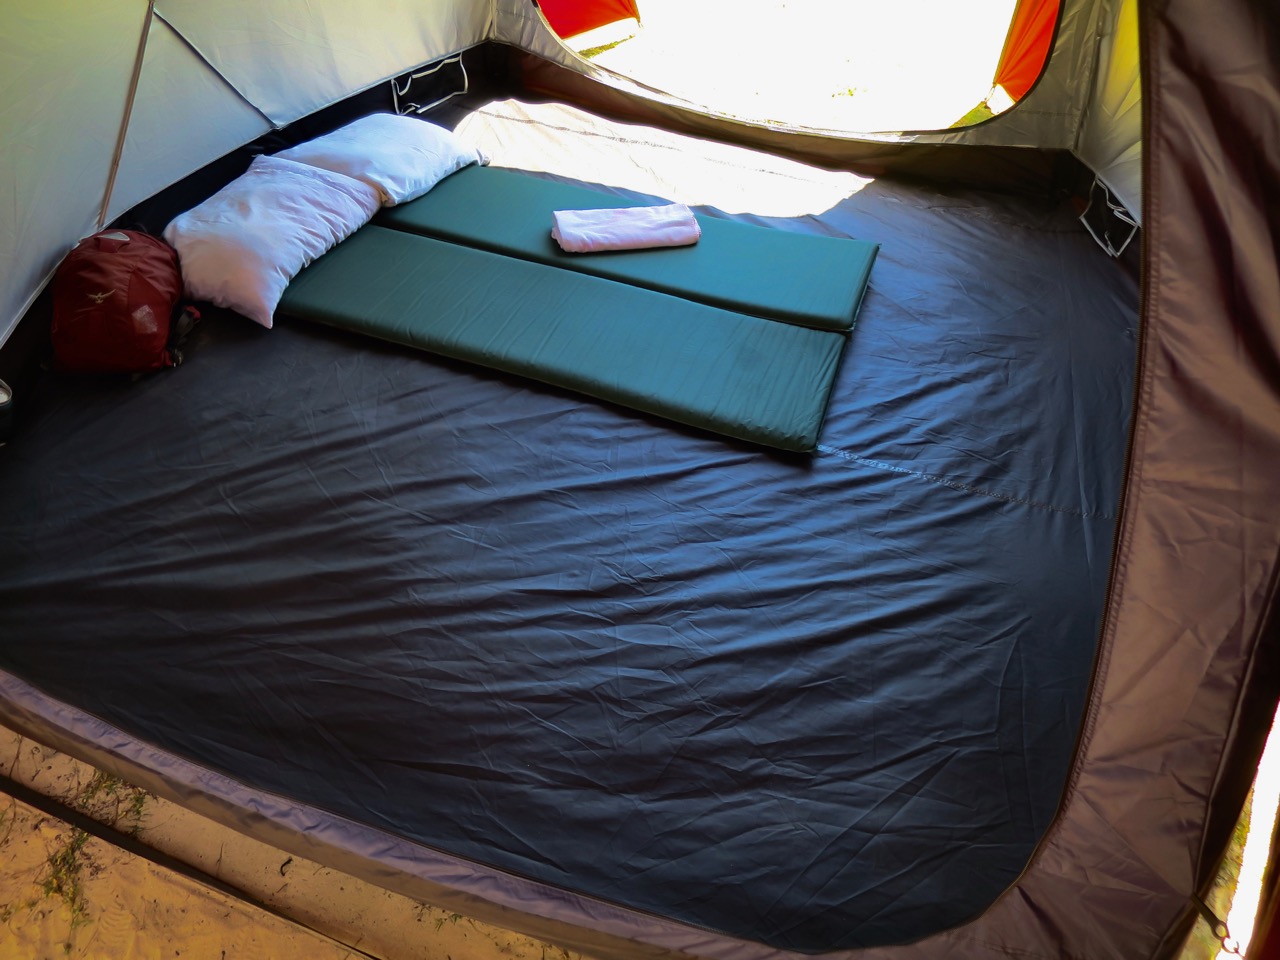 10' x 9' Inner tent floor sleeps 6 people, or two with a king sized inflatable matress and room for your stuff